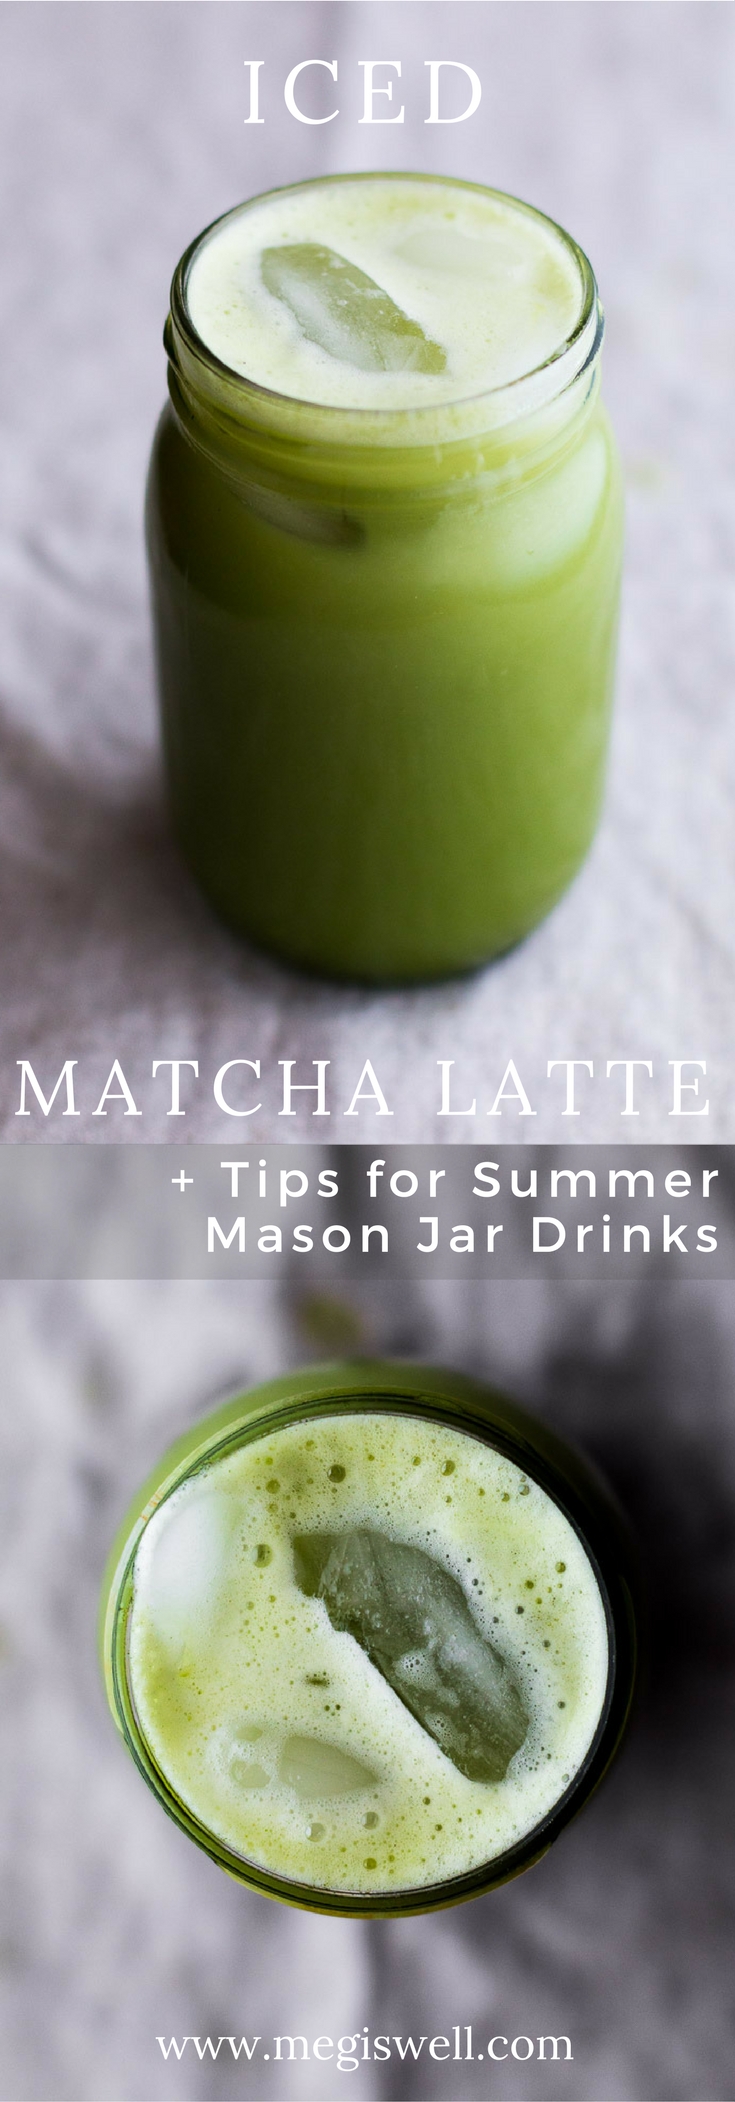 This Iced Matcha Latte is a sweet and light treat that’s easily made in a mason jar for fast summer fun. | www.megiswell.com